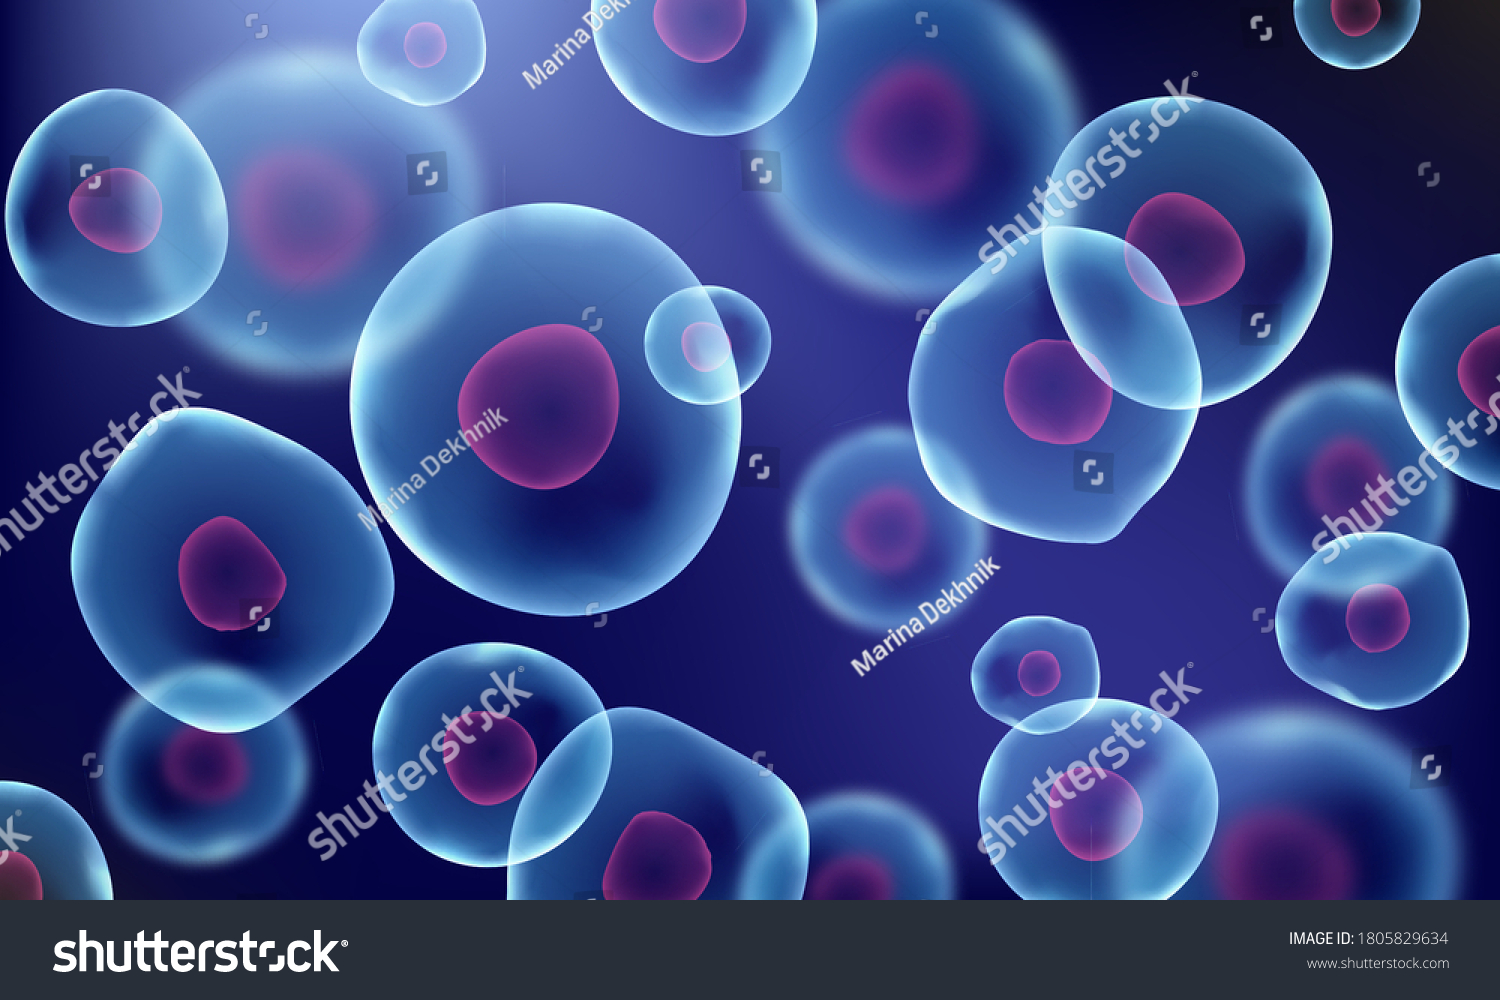 3d cell stem science background. Medical microscopic molecular conception. Biology research dna nucleus cells vector pattern.  #1805829634